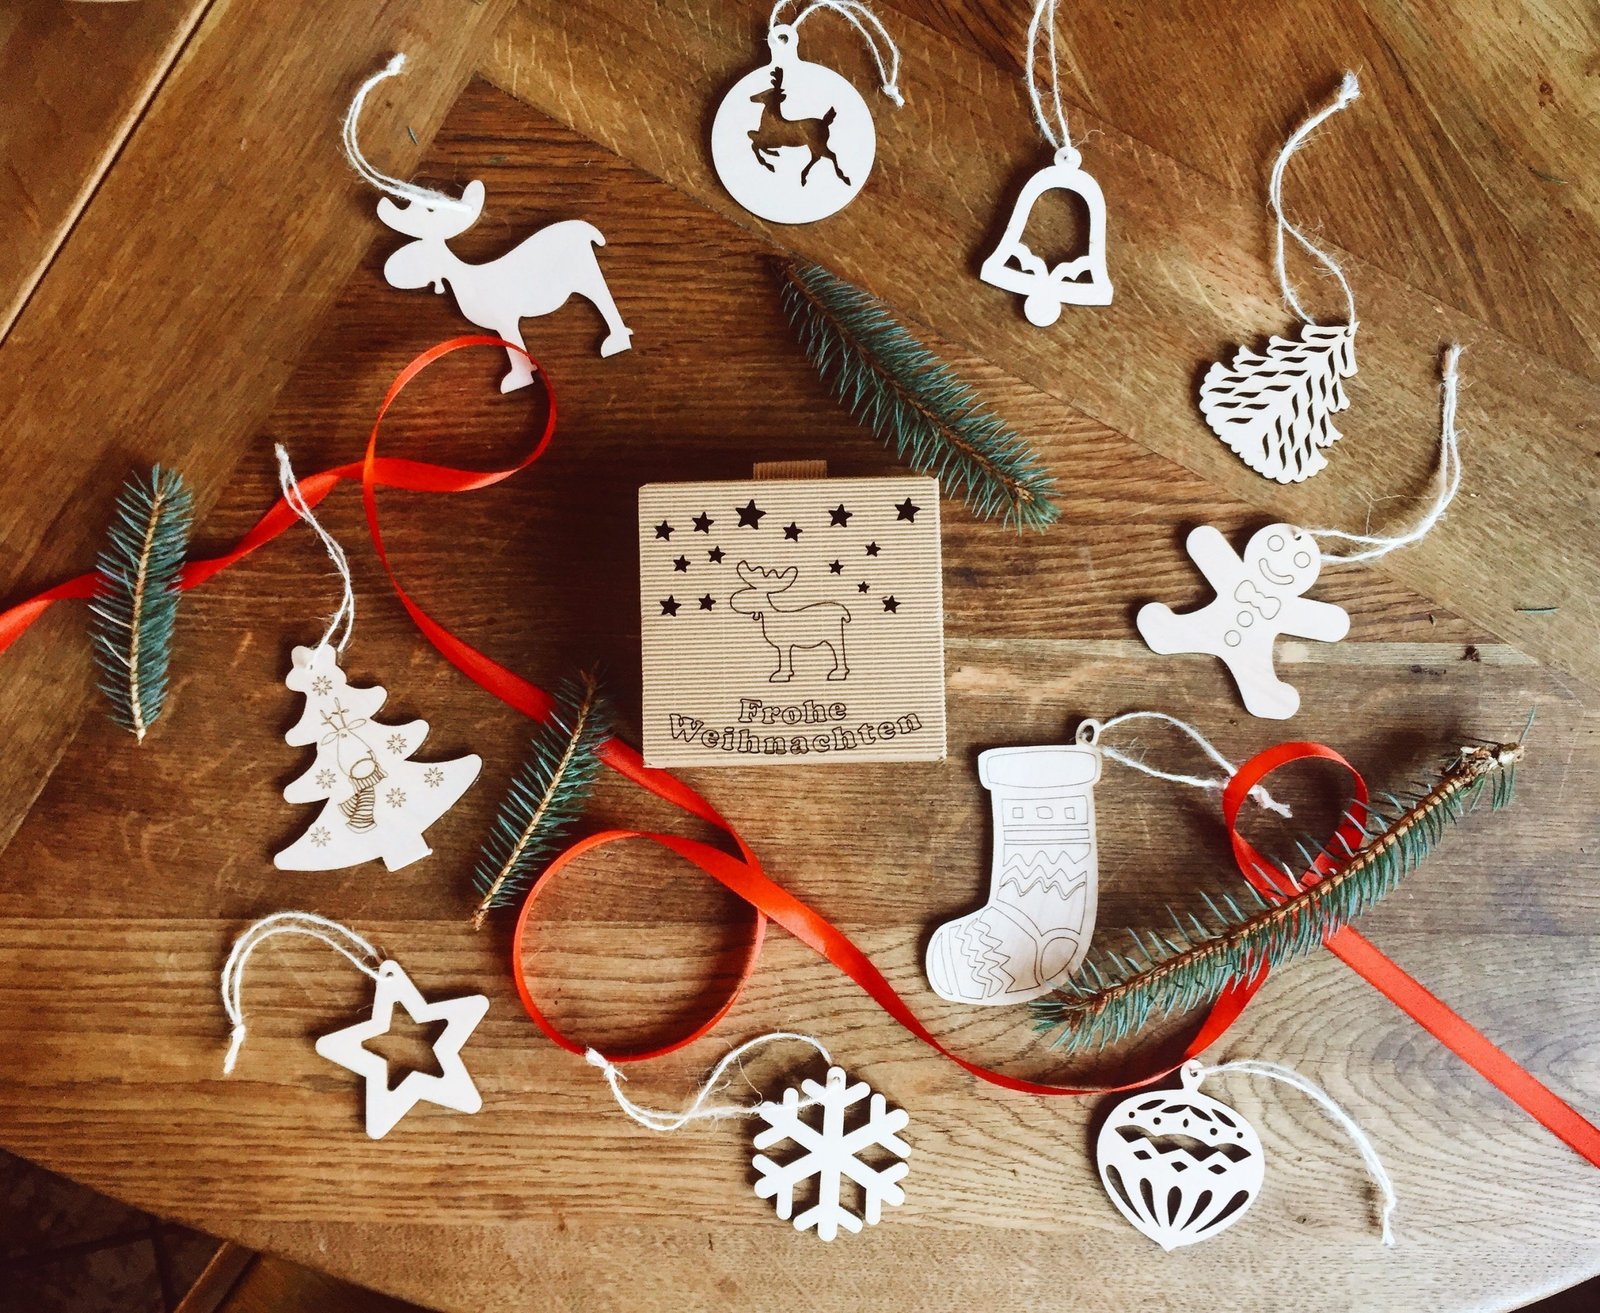 Great DIY ideas for homemade Christmas decorations scaled